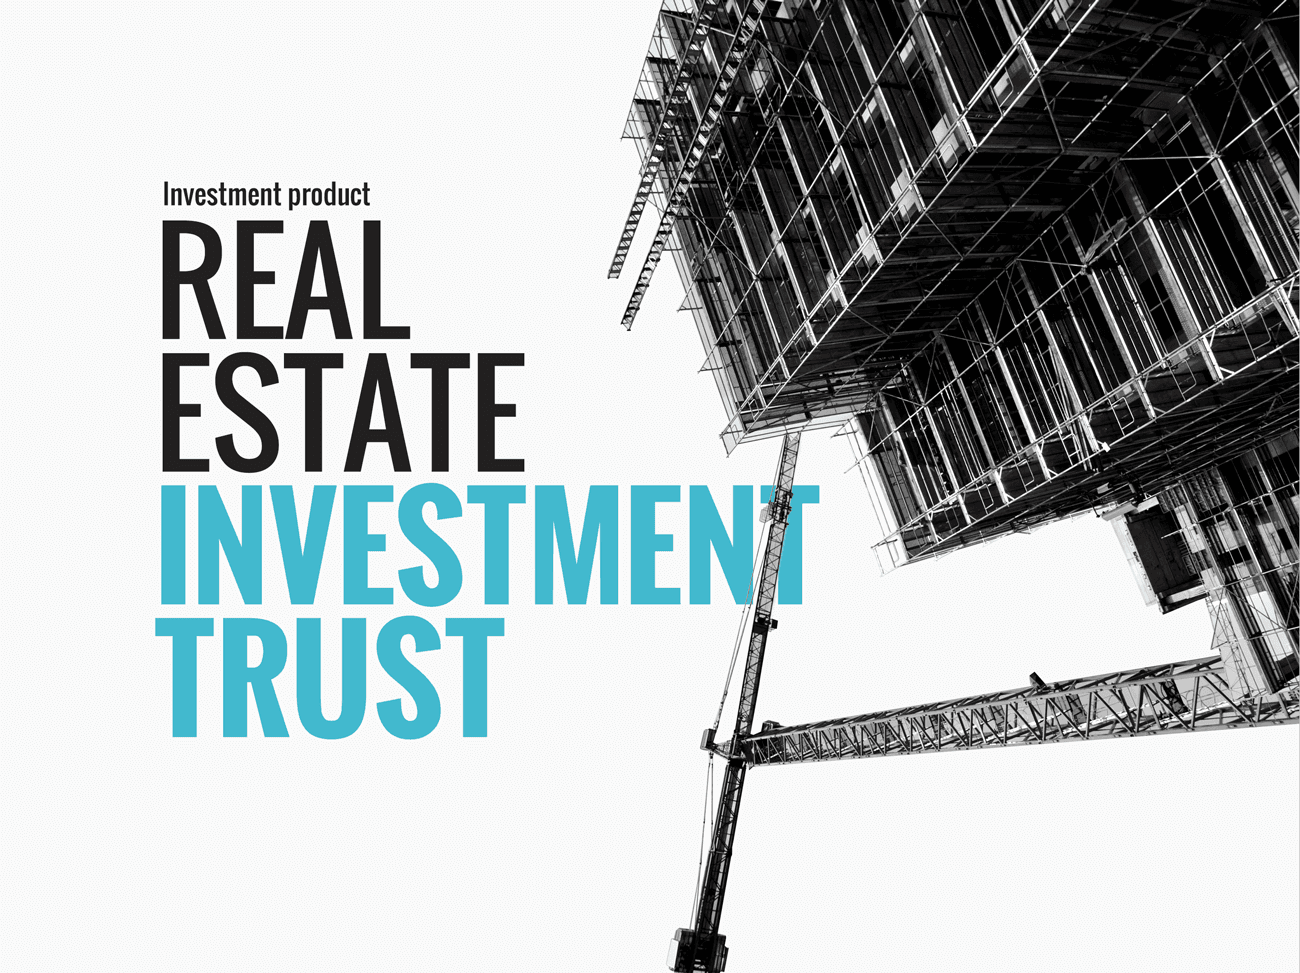 Investment product: Real estate investment trusts